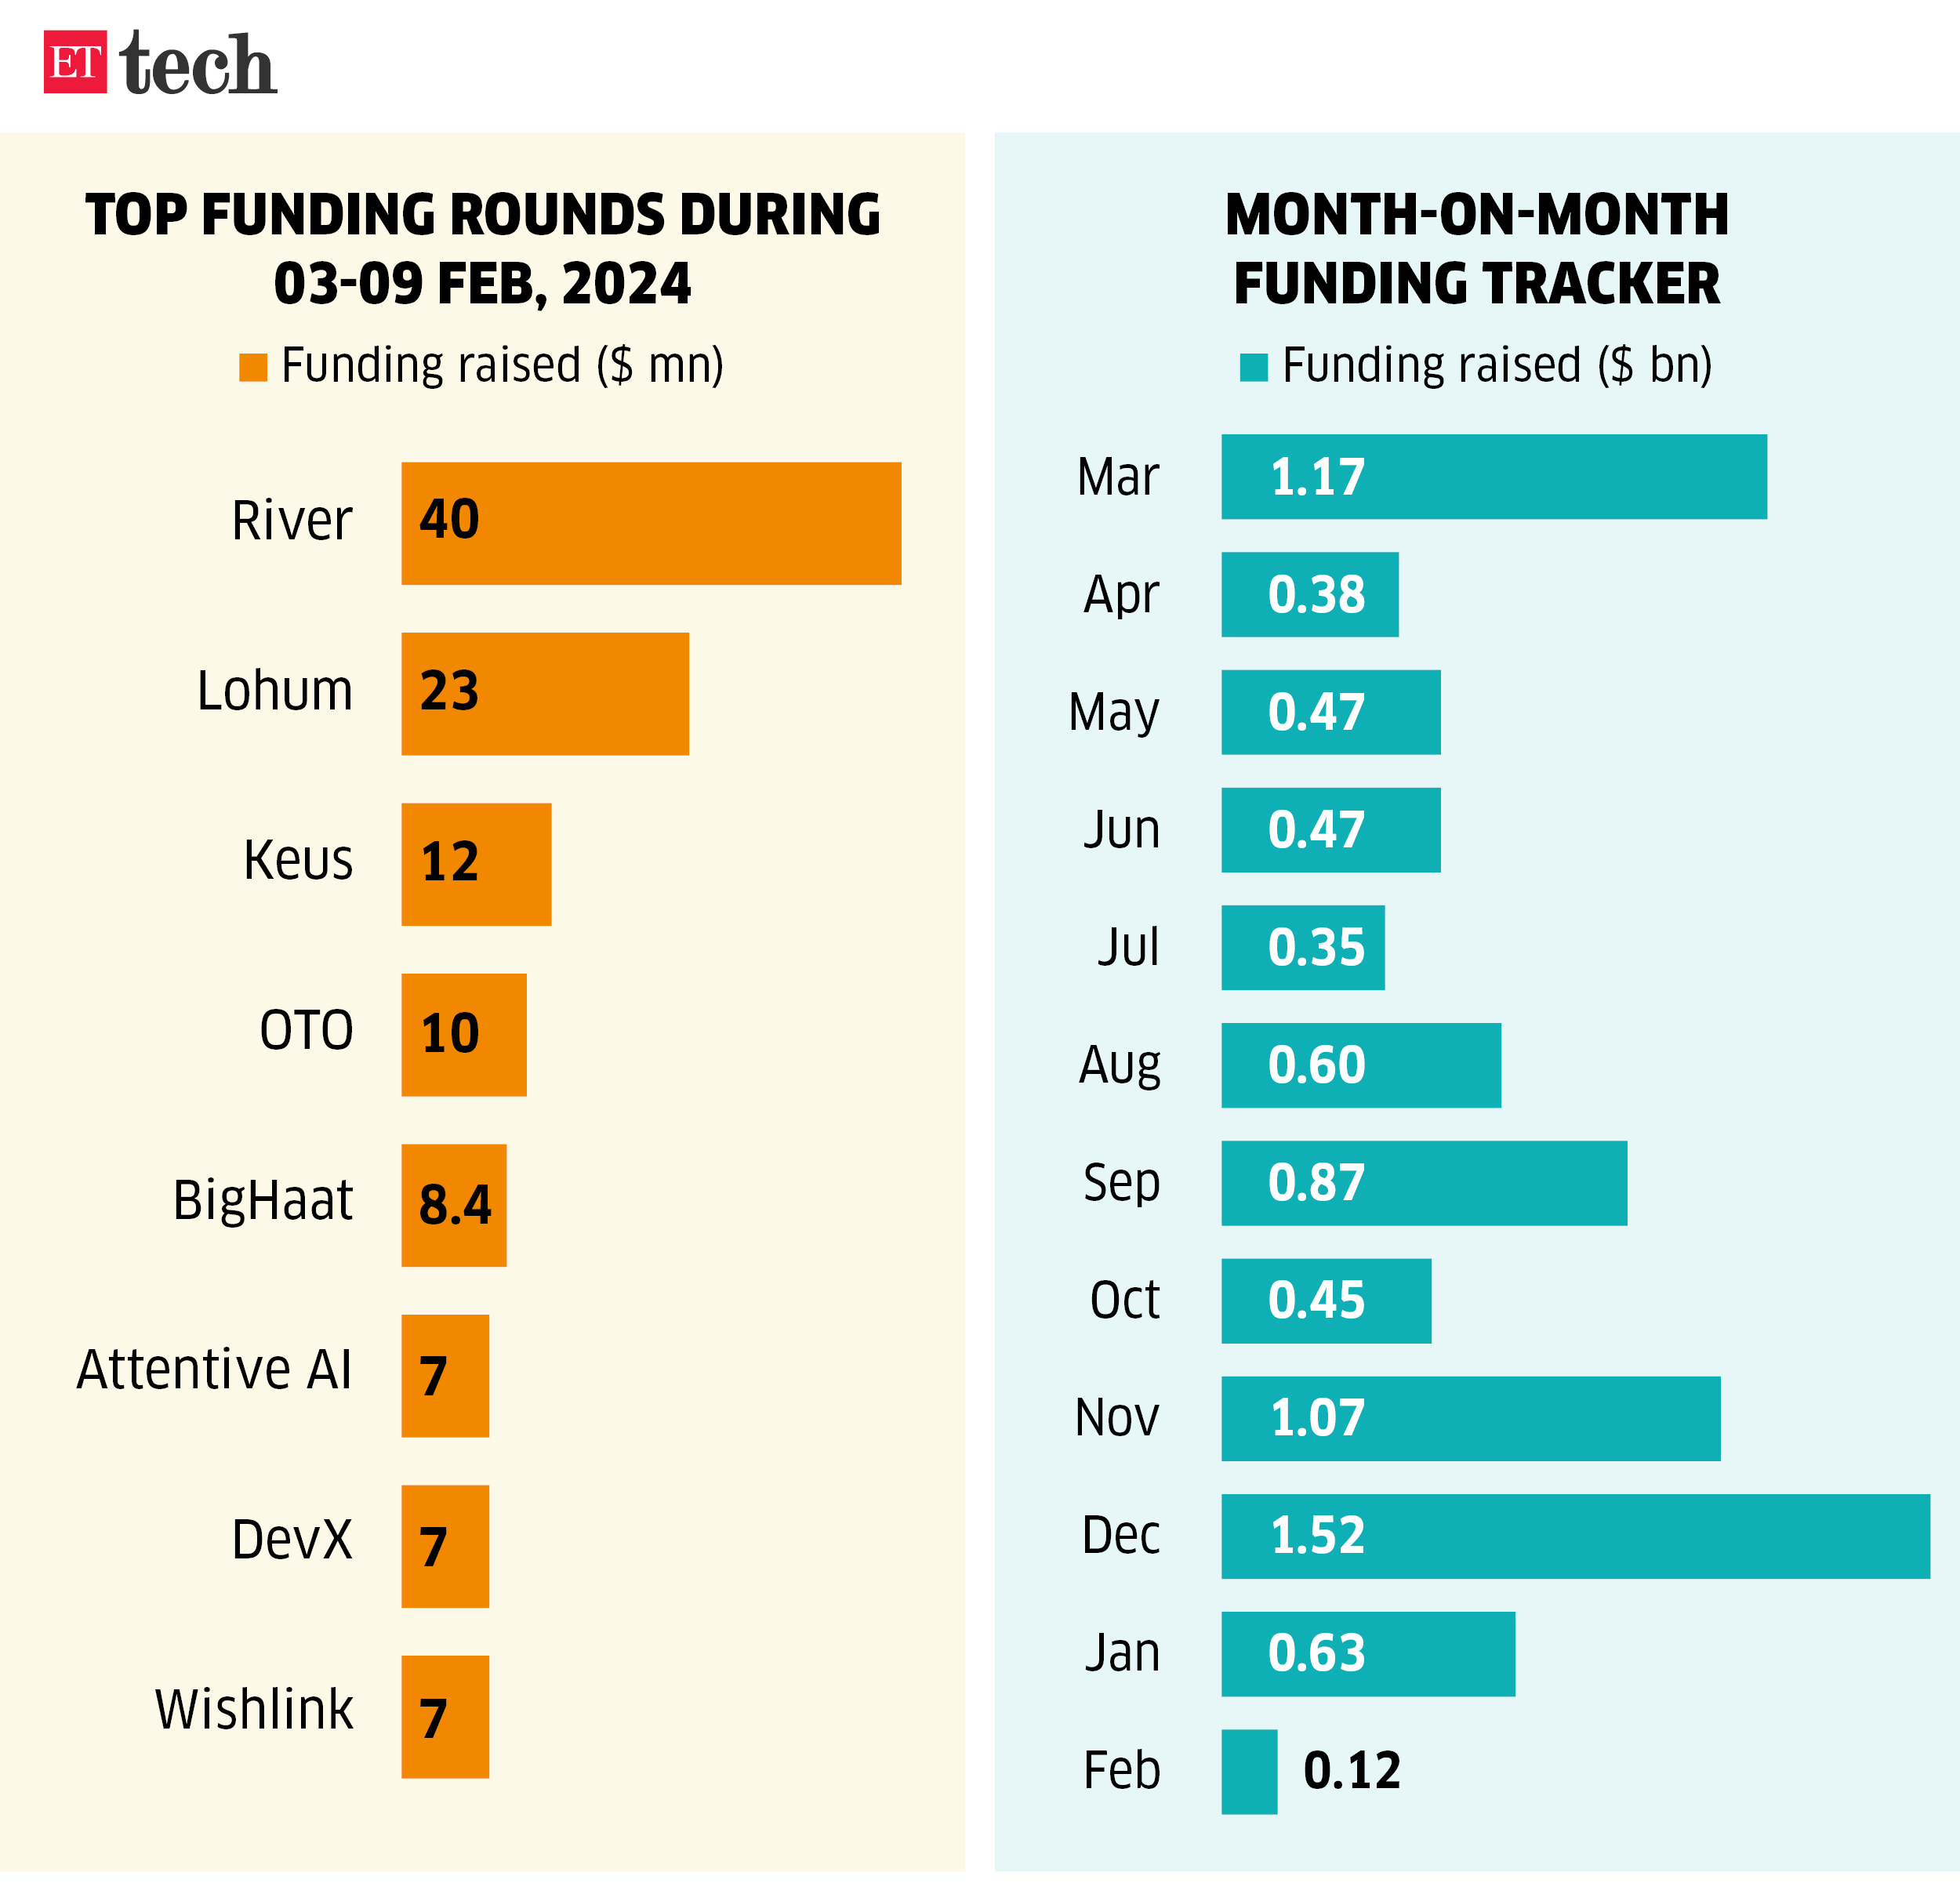 Top Funding rounds